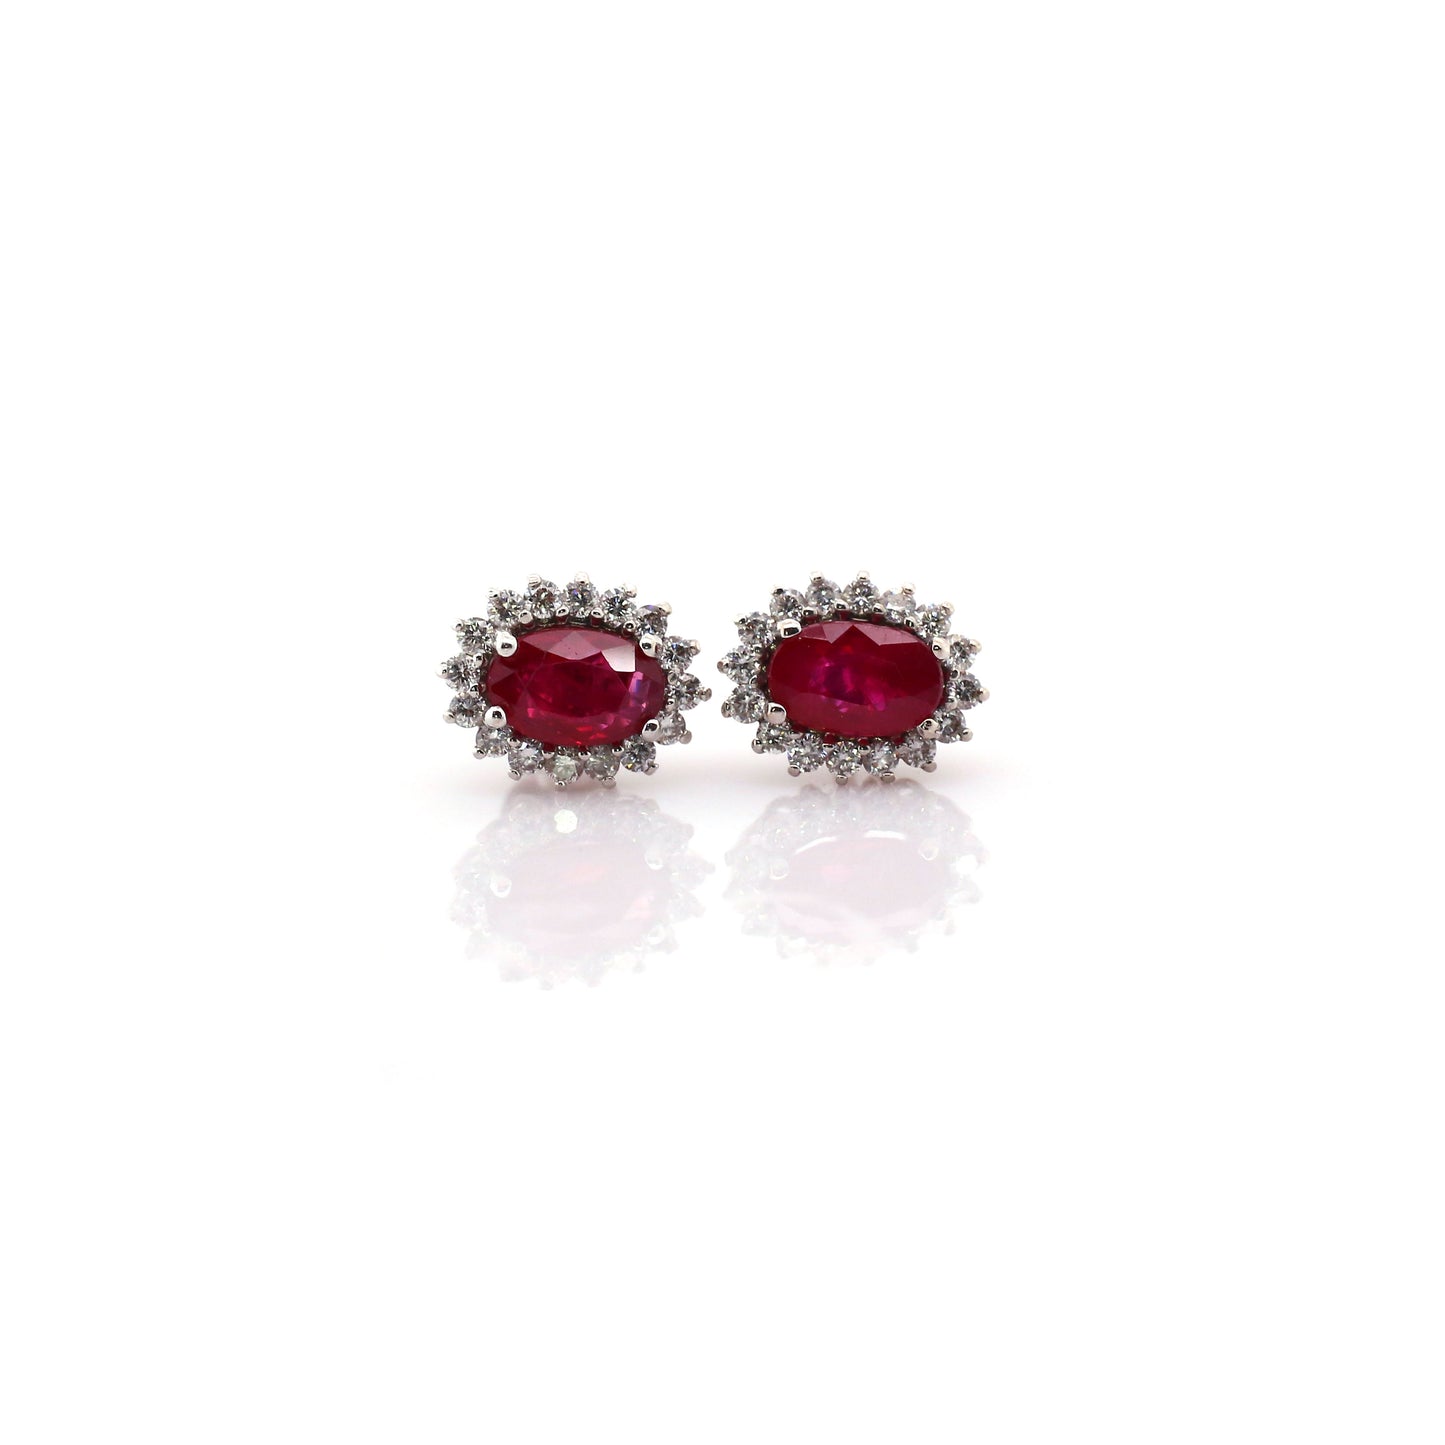 Beautiful and Almost Flawless Ruby has been Elegantly set with Natural Diamonds to create this 18kt White Gold Earring.